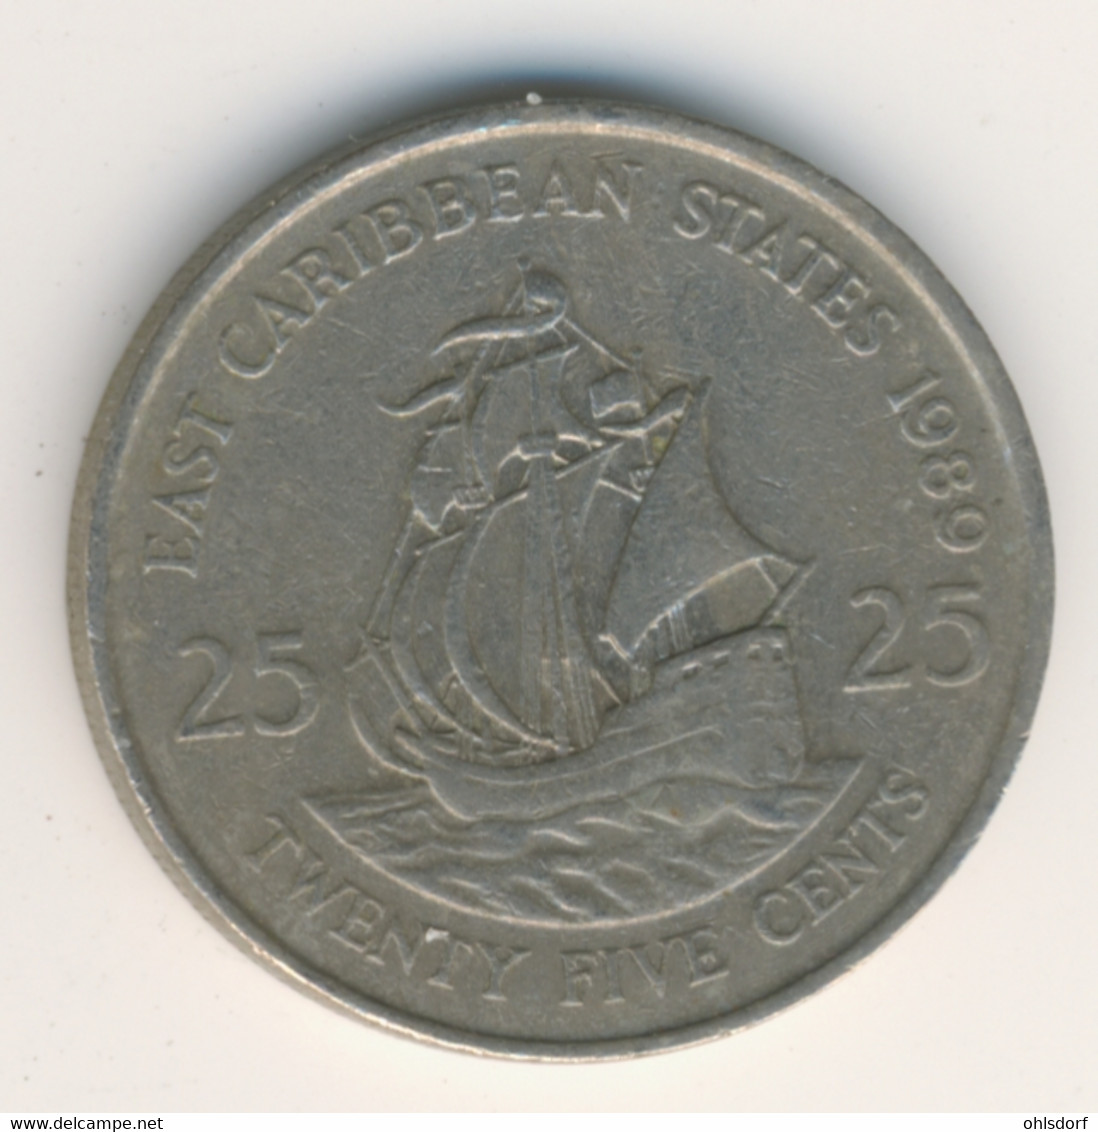 EAST CARIBBEAN STATES 1989: 25 Cents, KM 14 - East Caribbean States